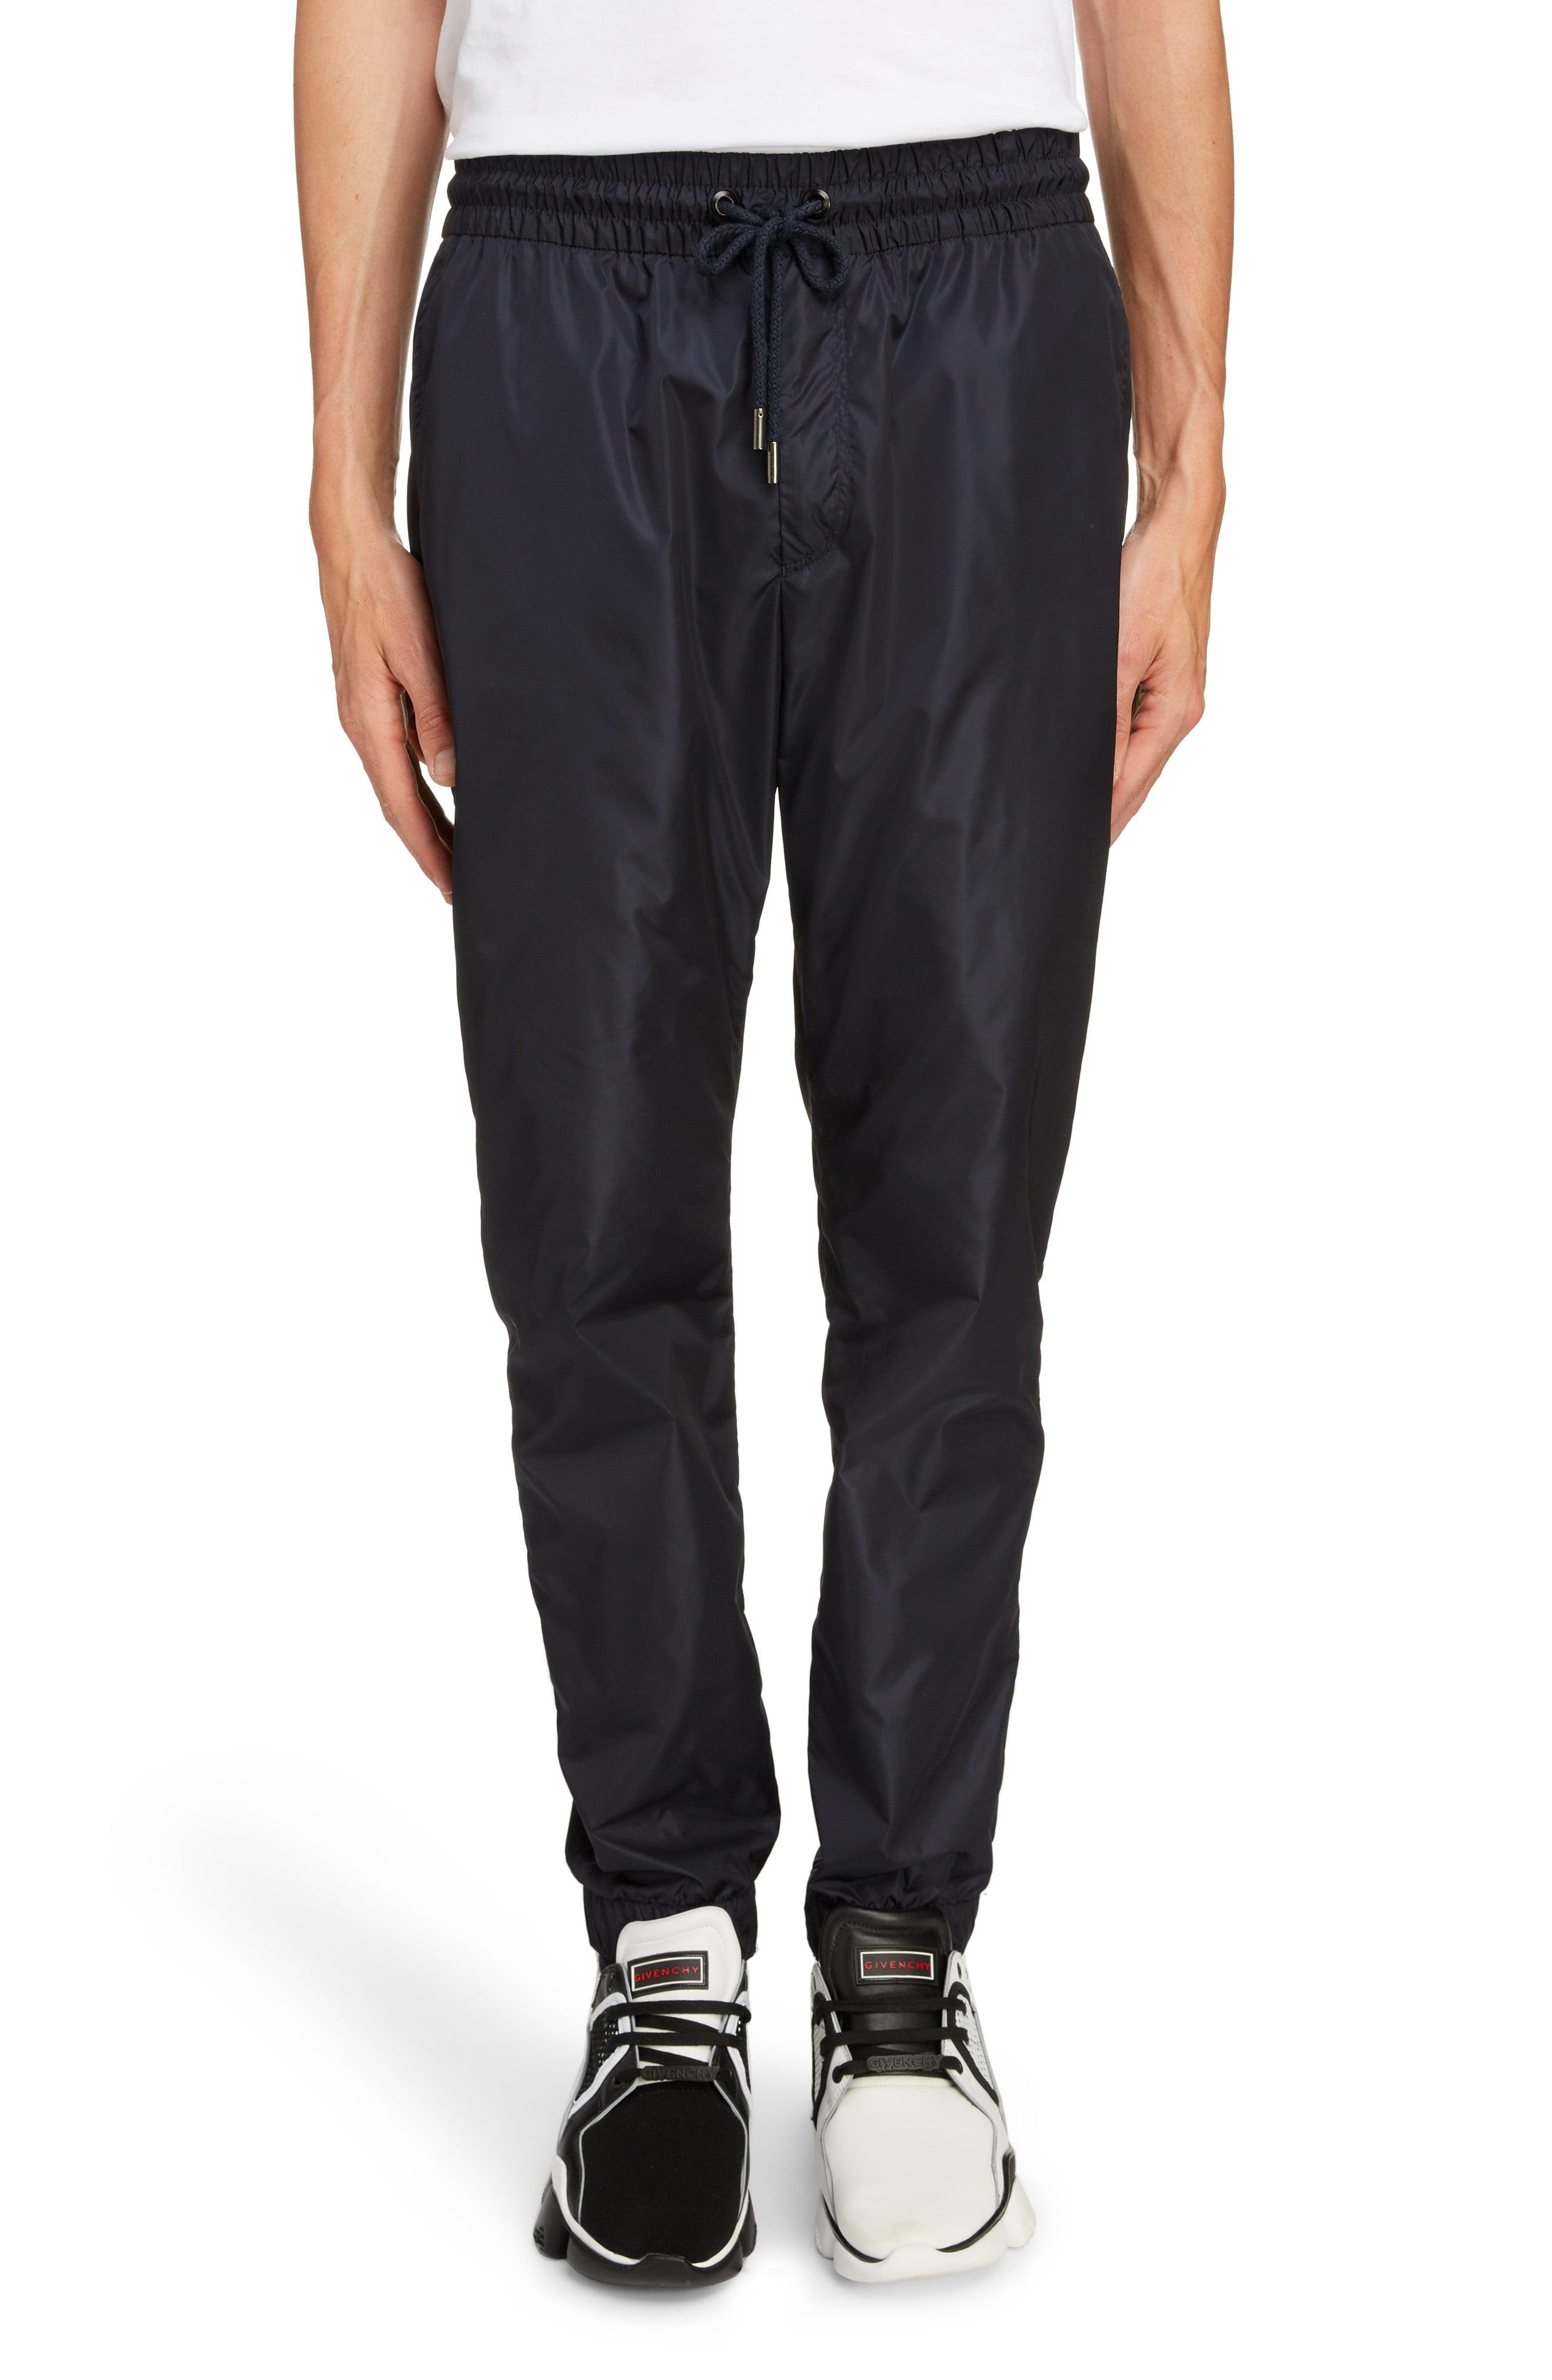 Lyst - Givenchy Nylon Jogger Pants in Blue for Men